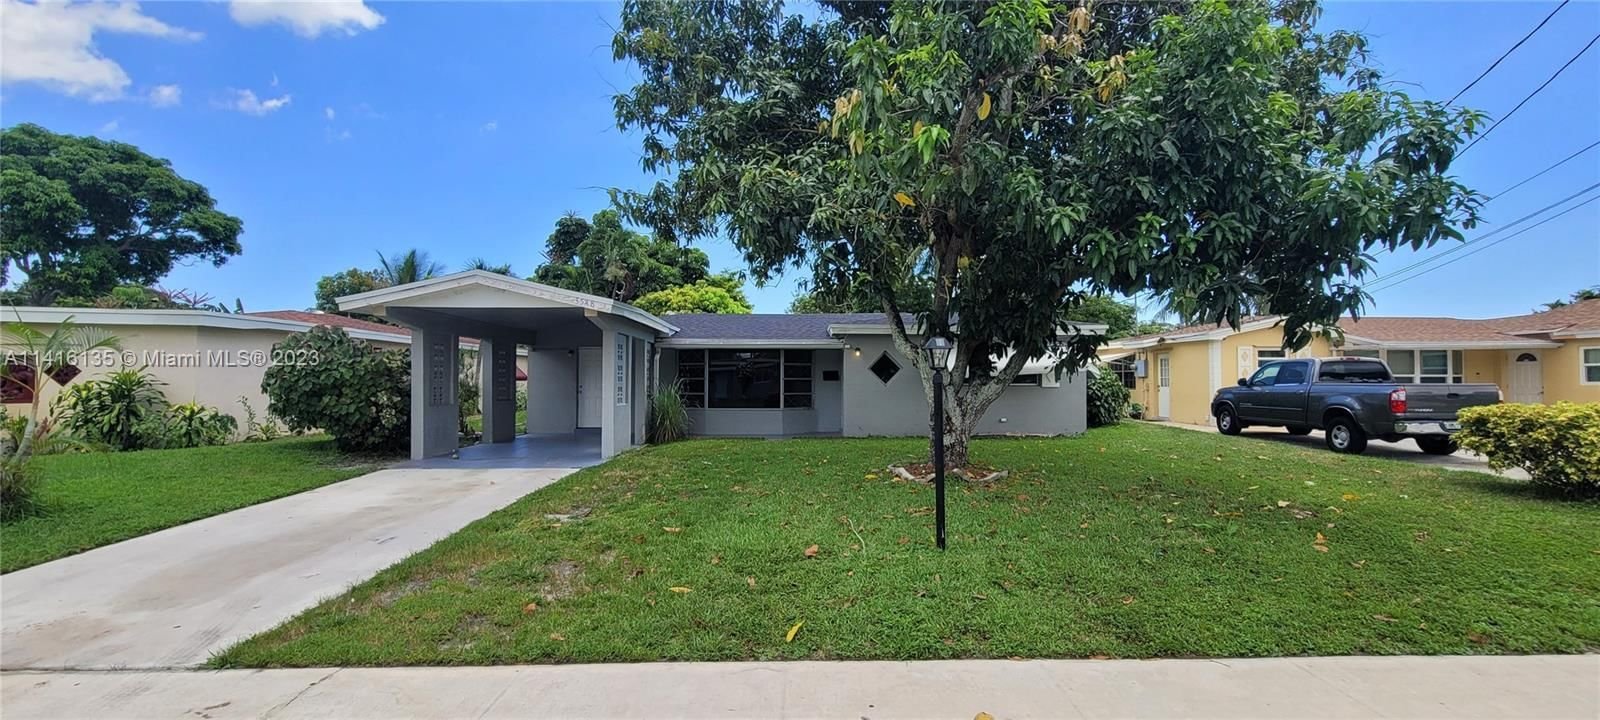 Real estate property located at 3548 38th Ave, Broward County, Lauderdale Lakes, FL